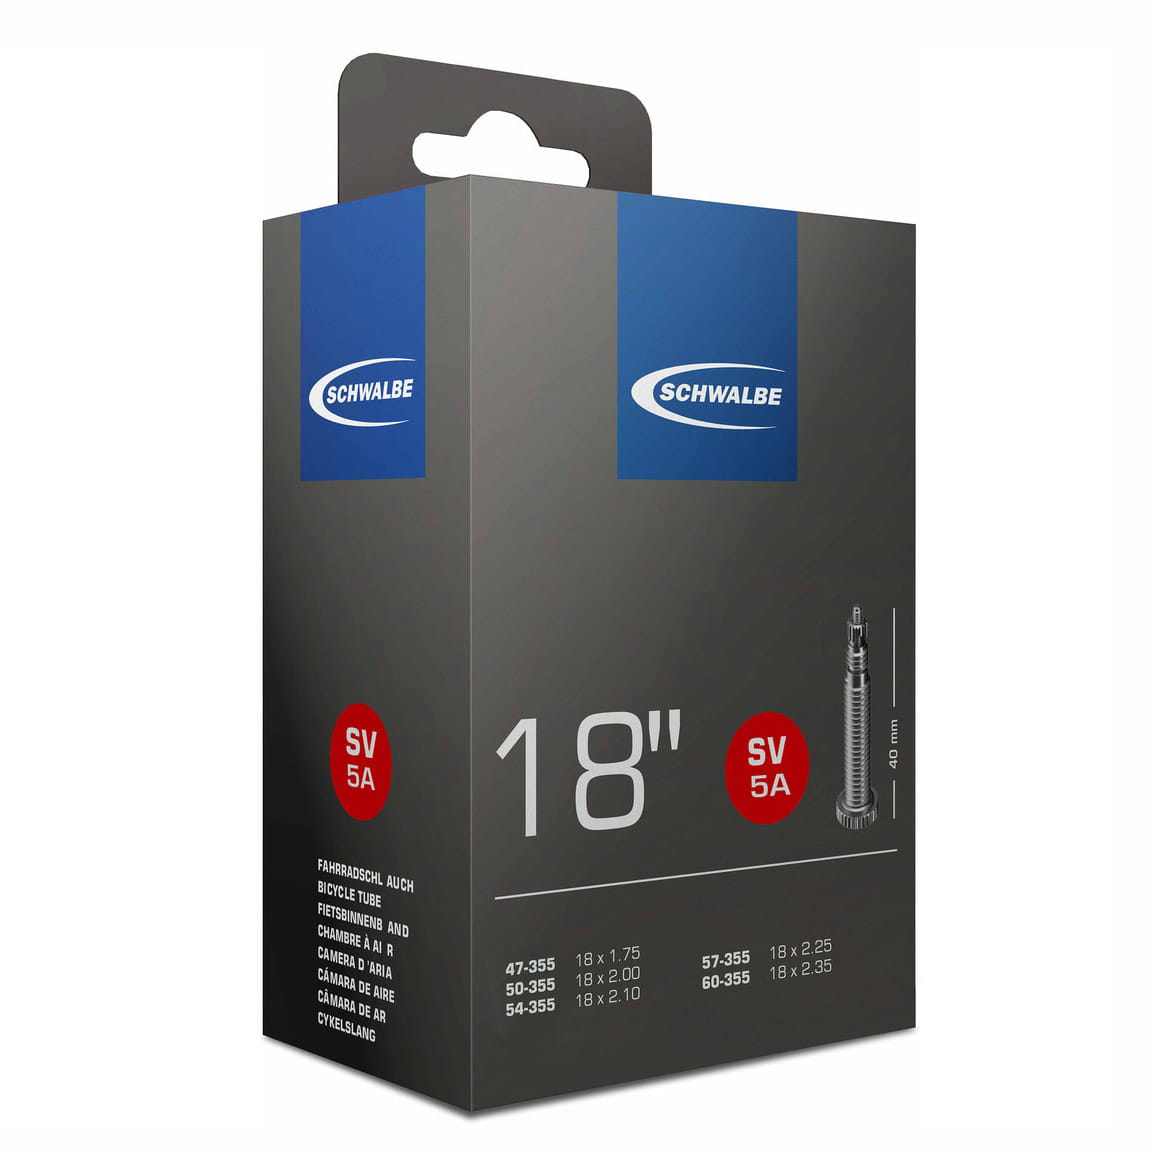 Schwalbe Bicycle Tube 5A for 18" 